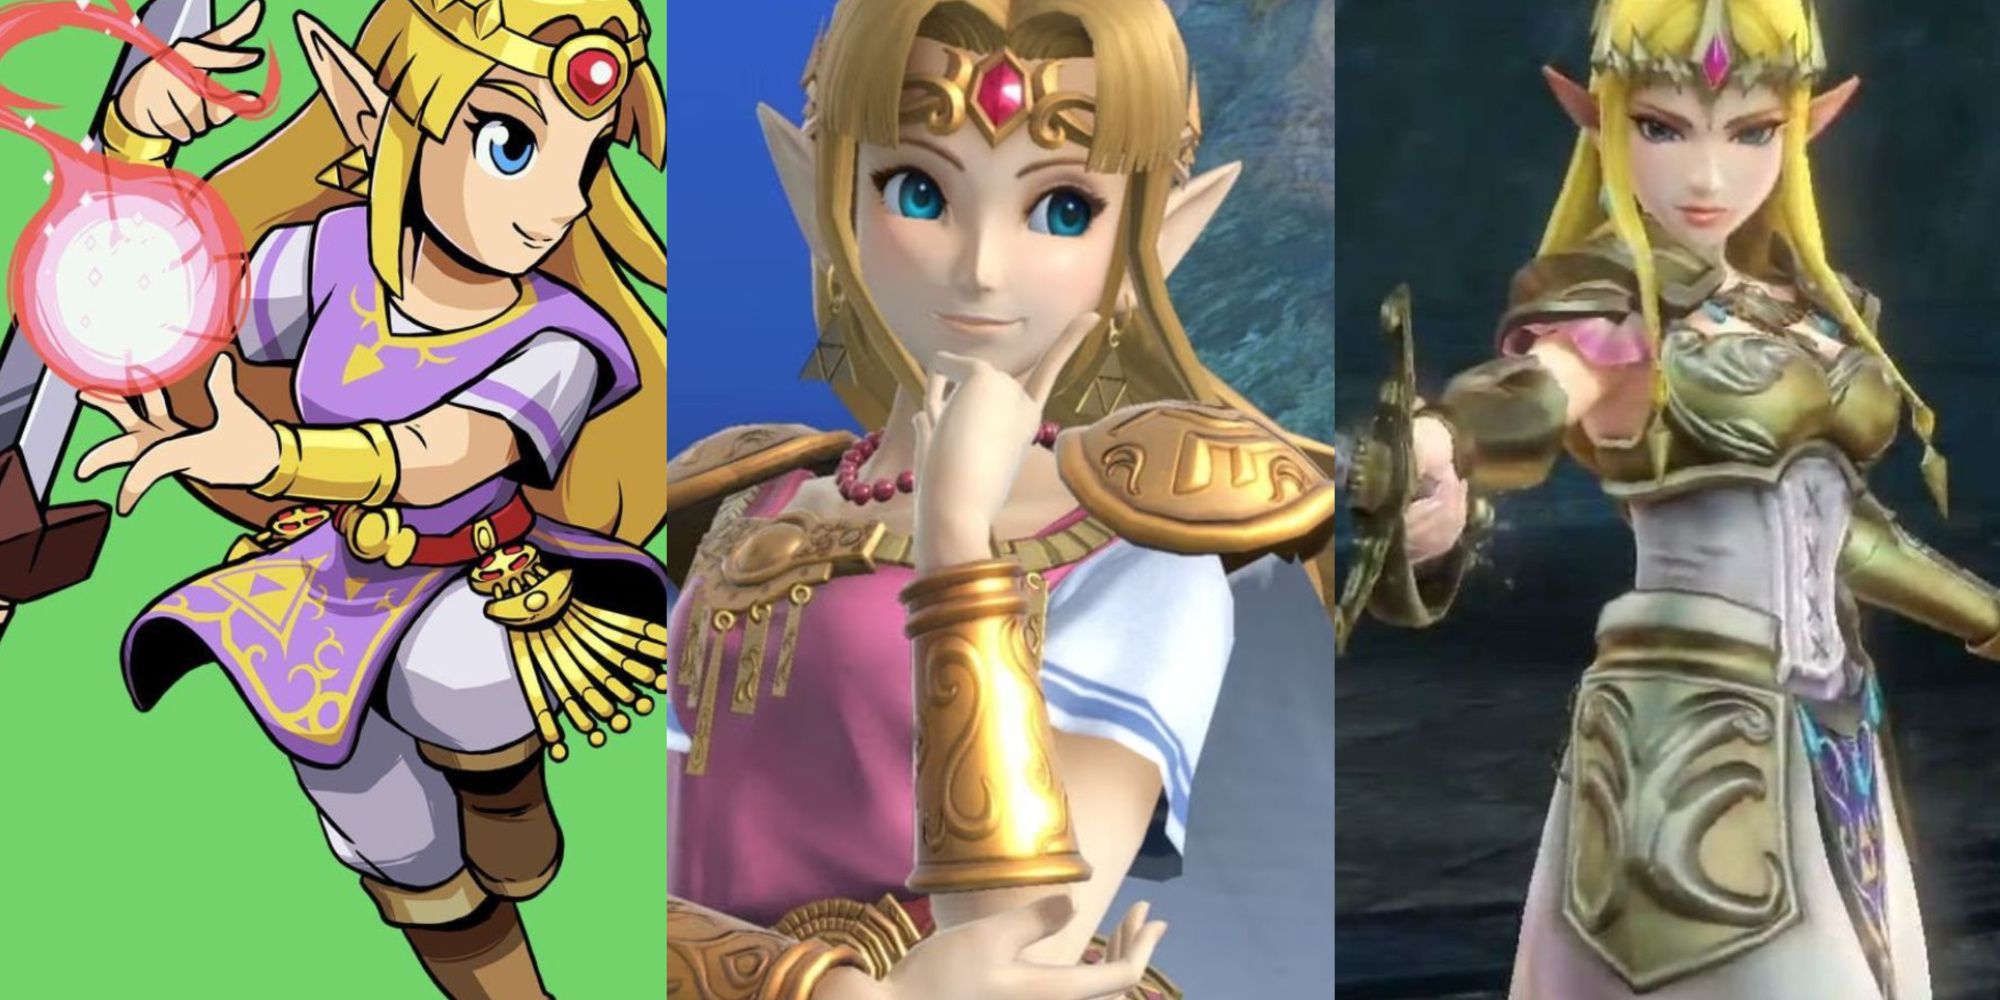 A collage showing three different versions of Zelda.